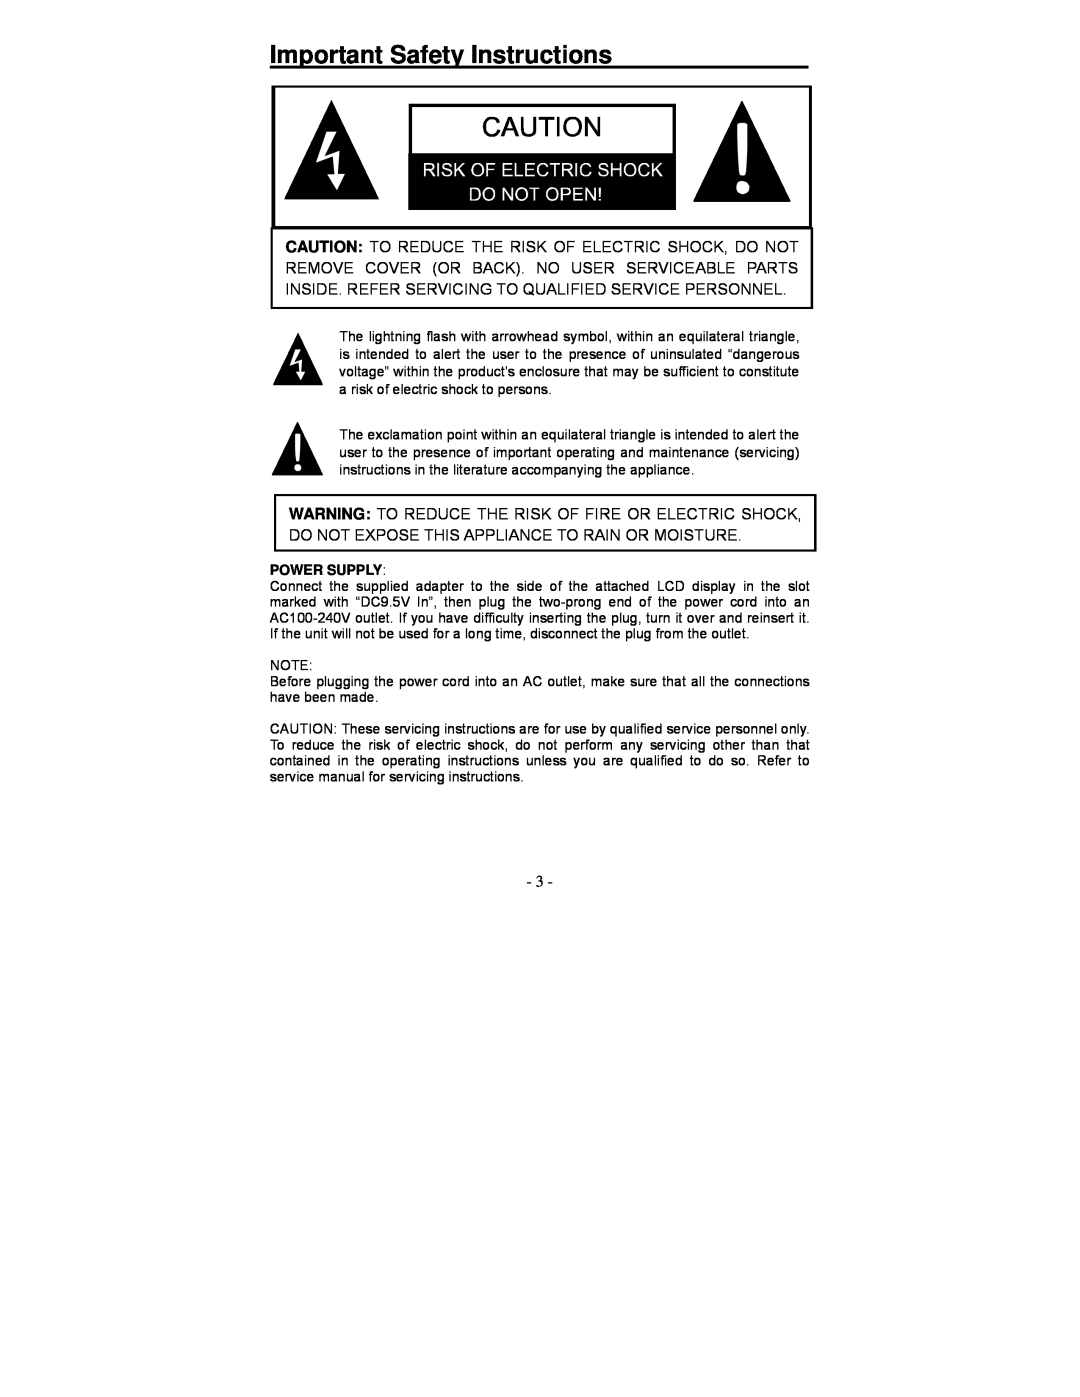 Polaroid PDV-0713A operation manual Important Safety Instructions, Power Supply 